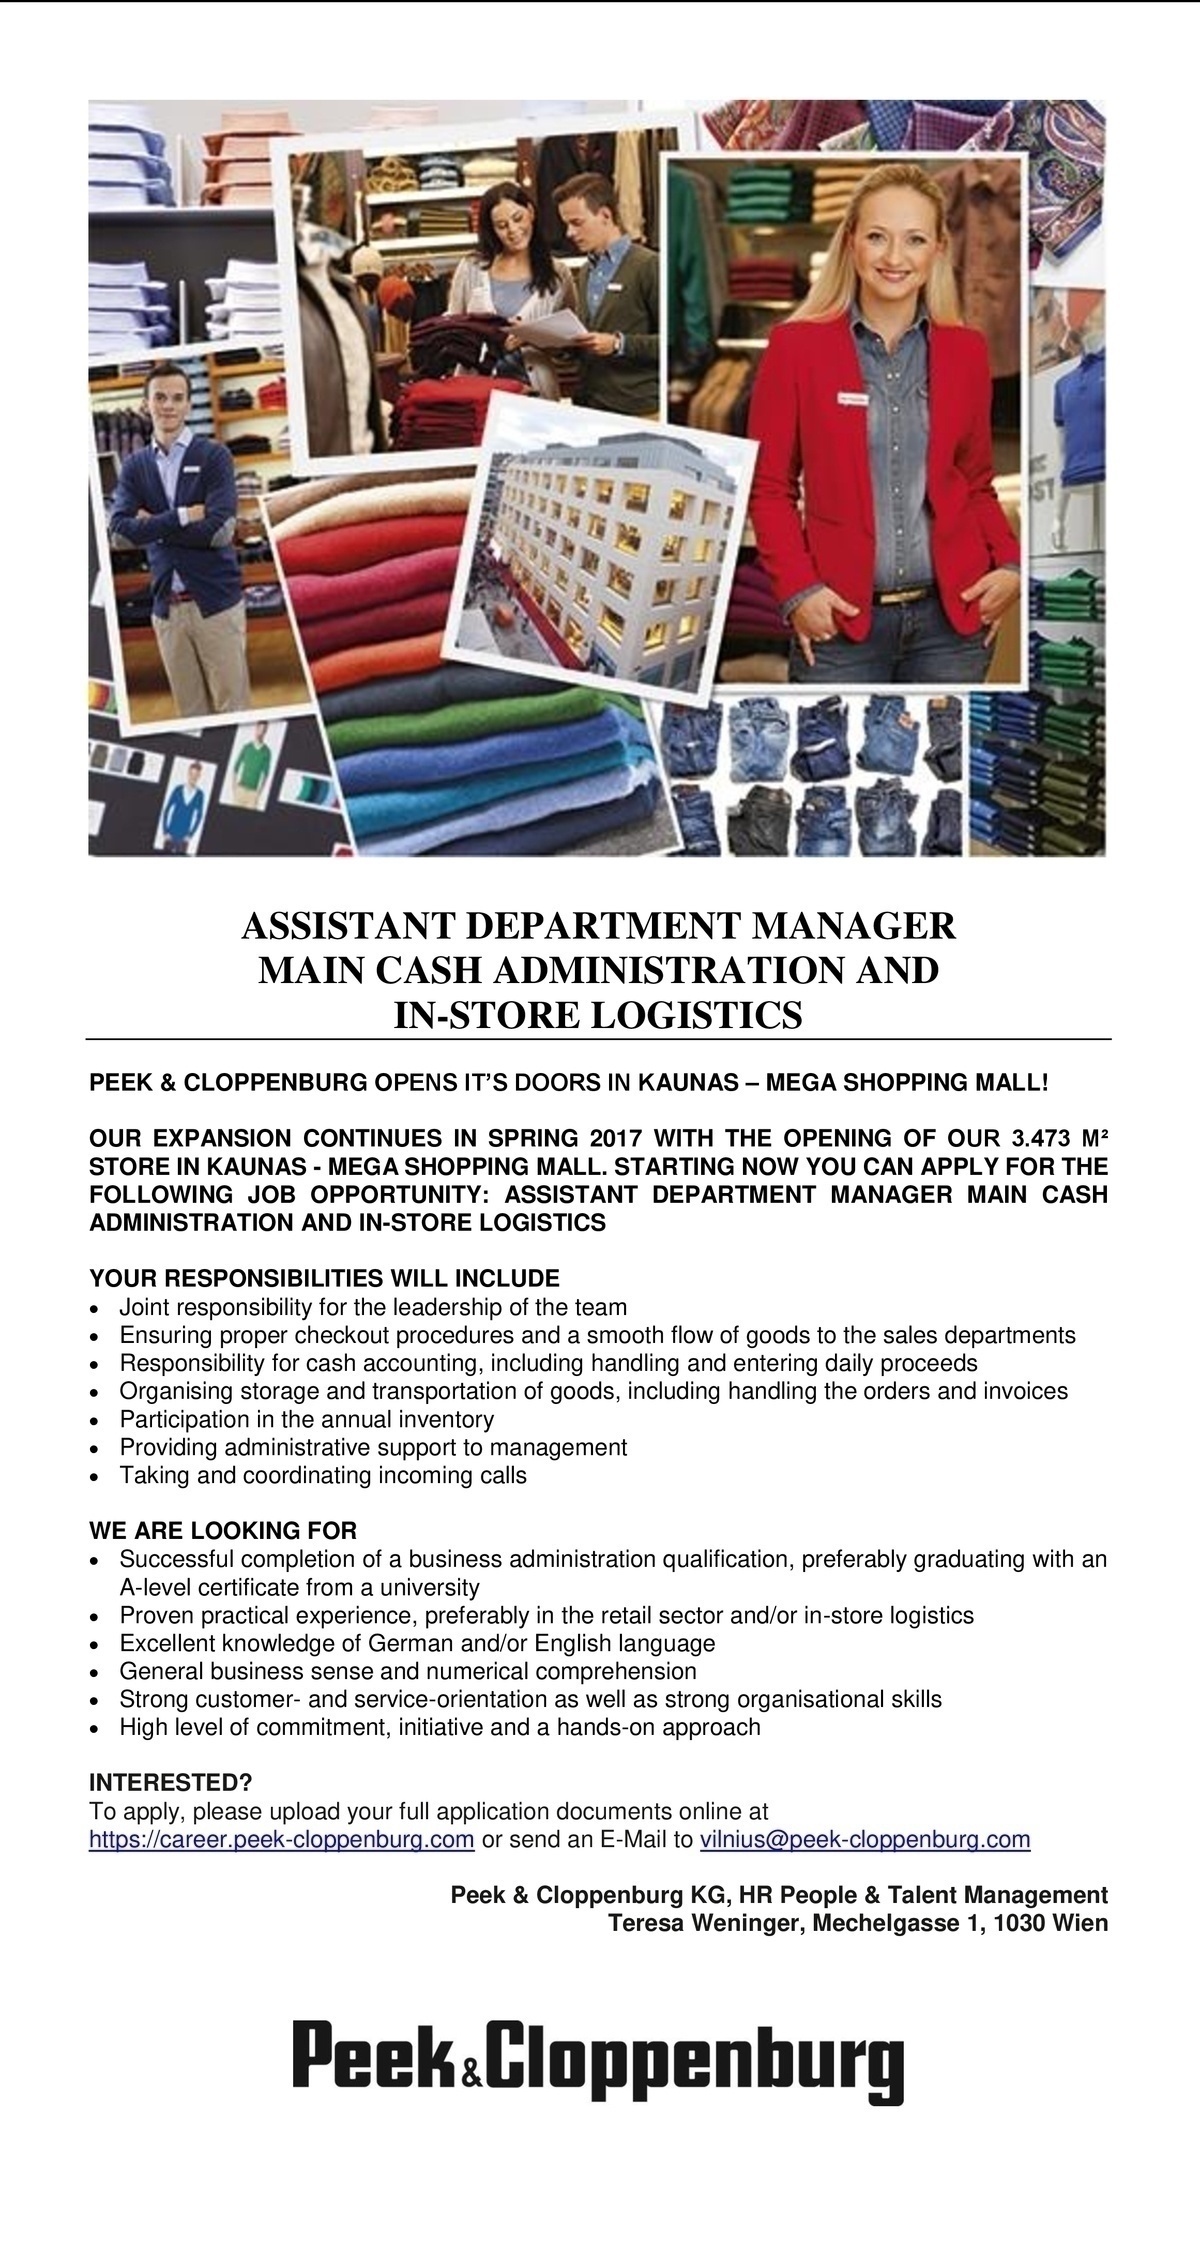 Peek&Cloppenburg ASSISTANT DEPARTMENT MANAGER MAIN CASH ADMINISTRATION AND IN-STORE LOGISTICS